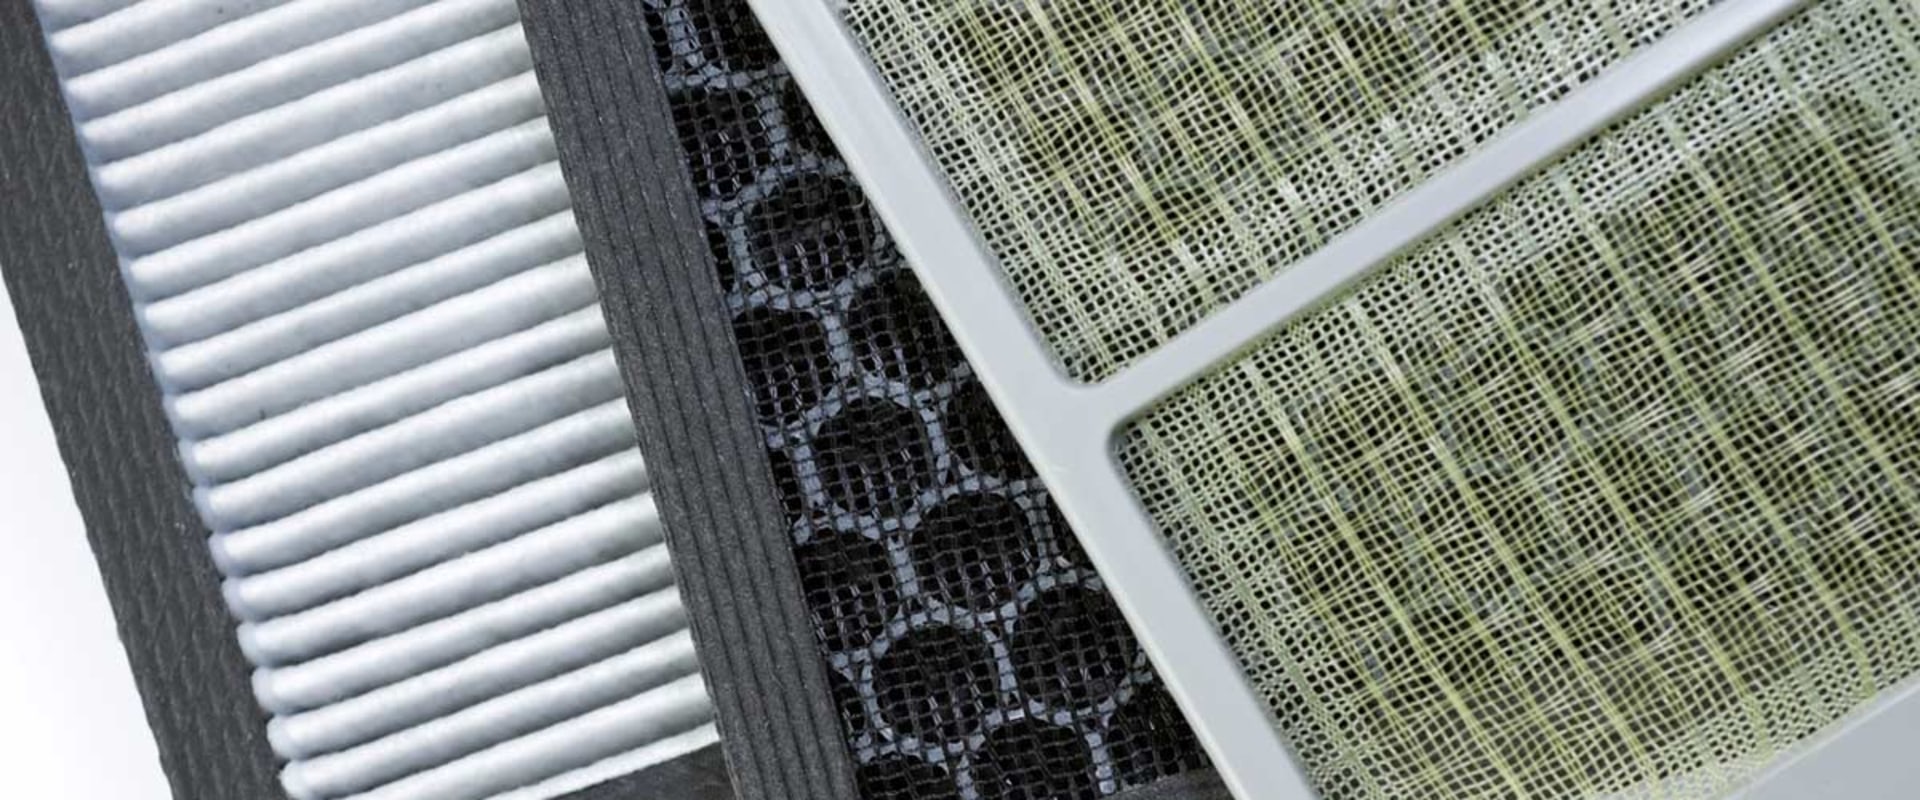 The Best Air Conditioning Filters for Your Home